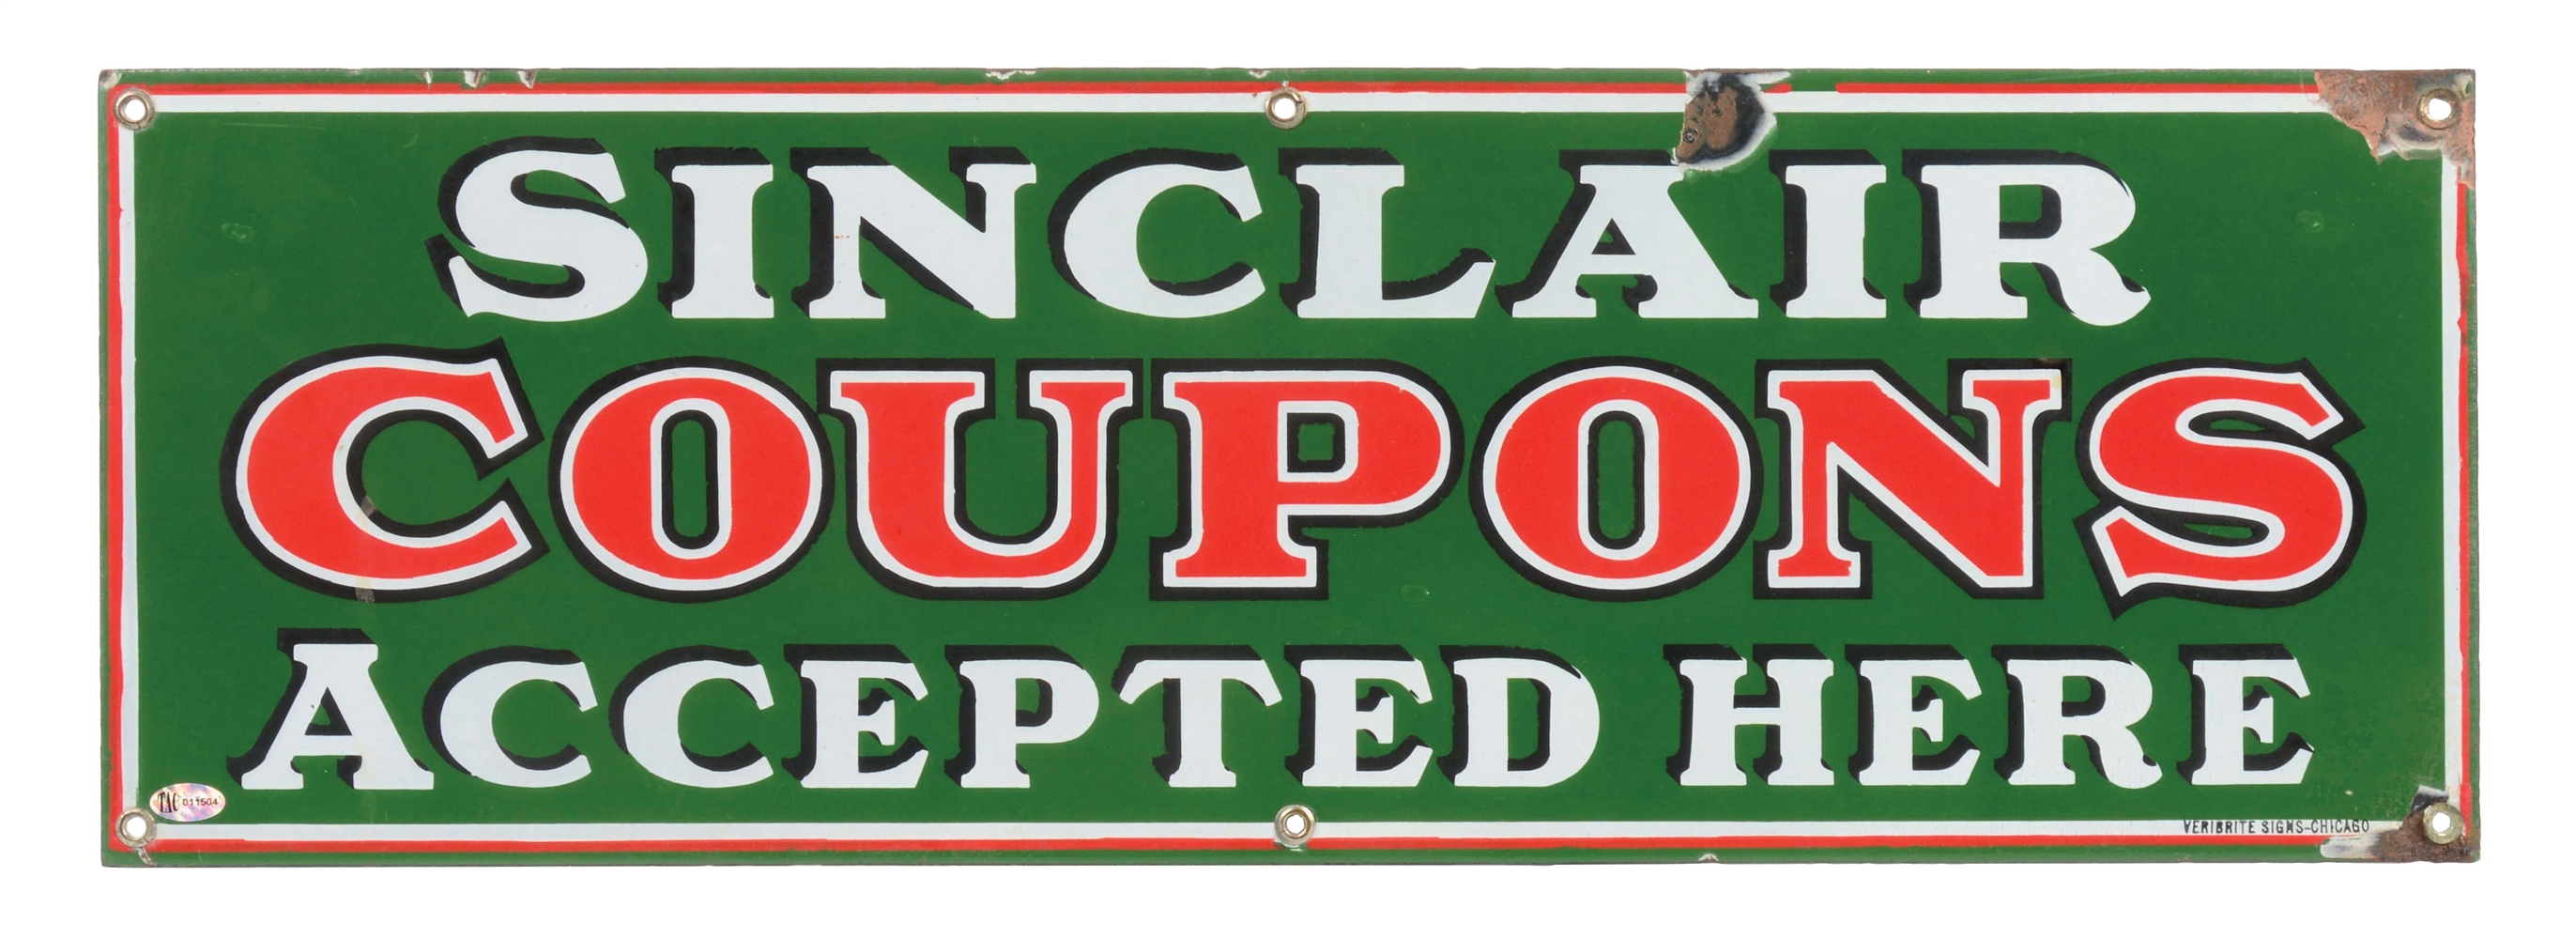 RARE SINCLAIR "COUPONS ACCEPTED HERE" PORCELAIN SERVICE STATION SIGN. 